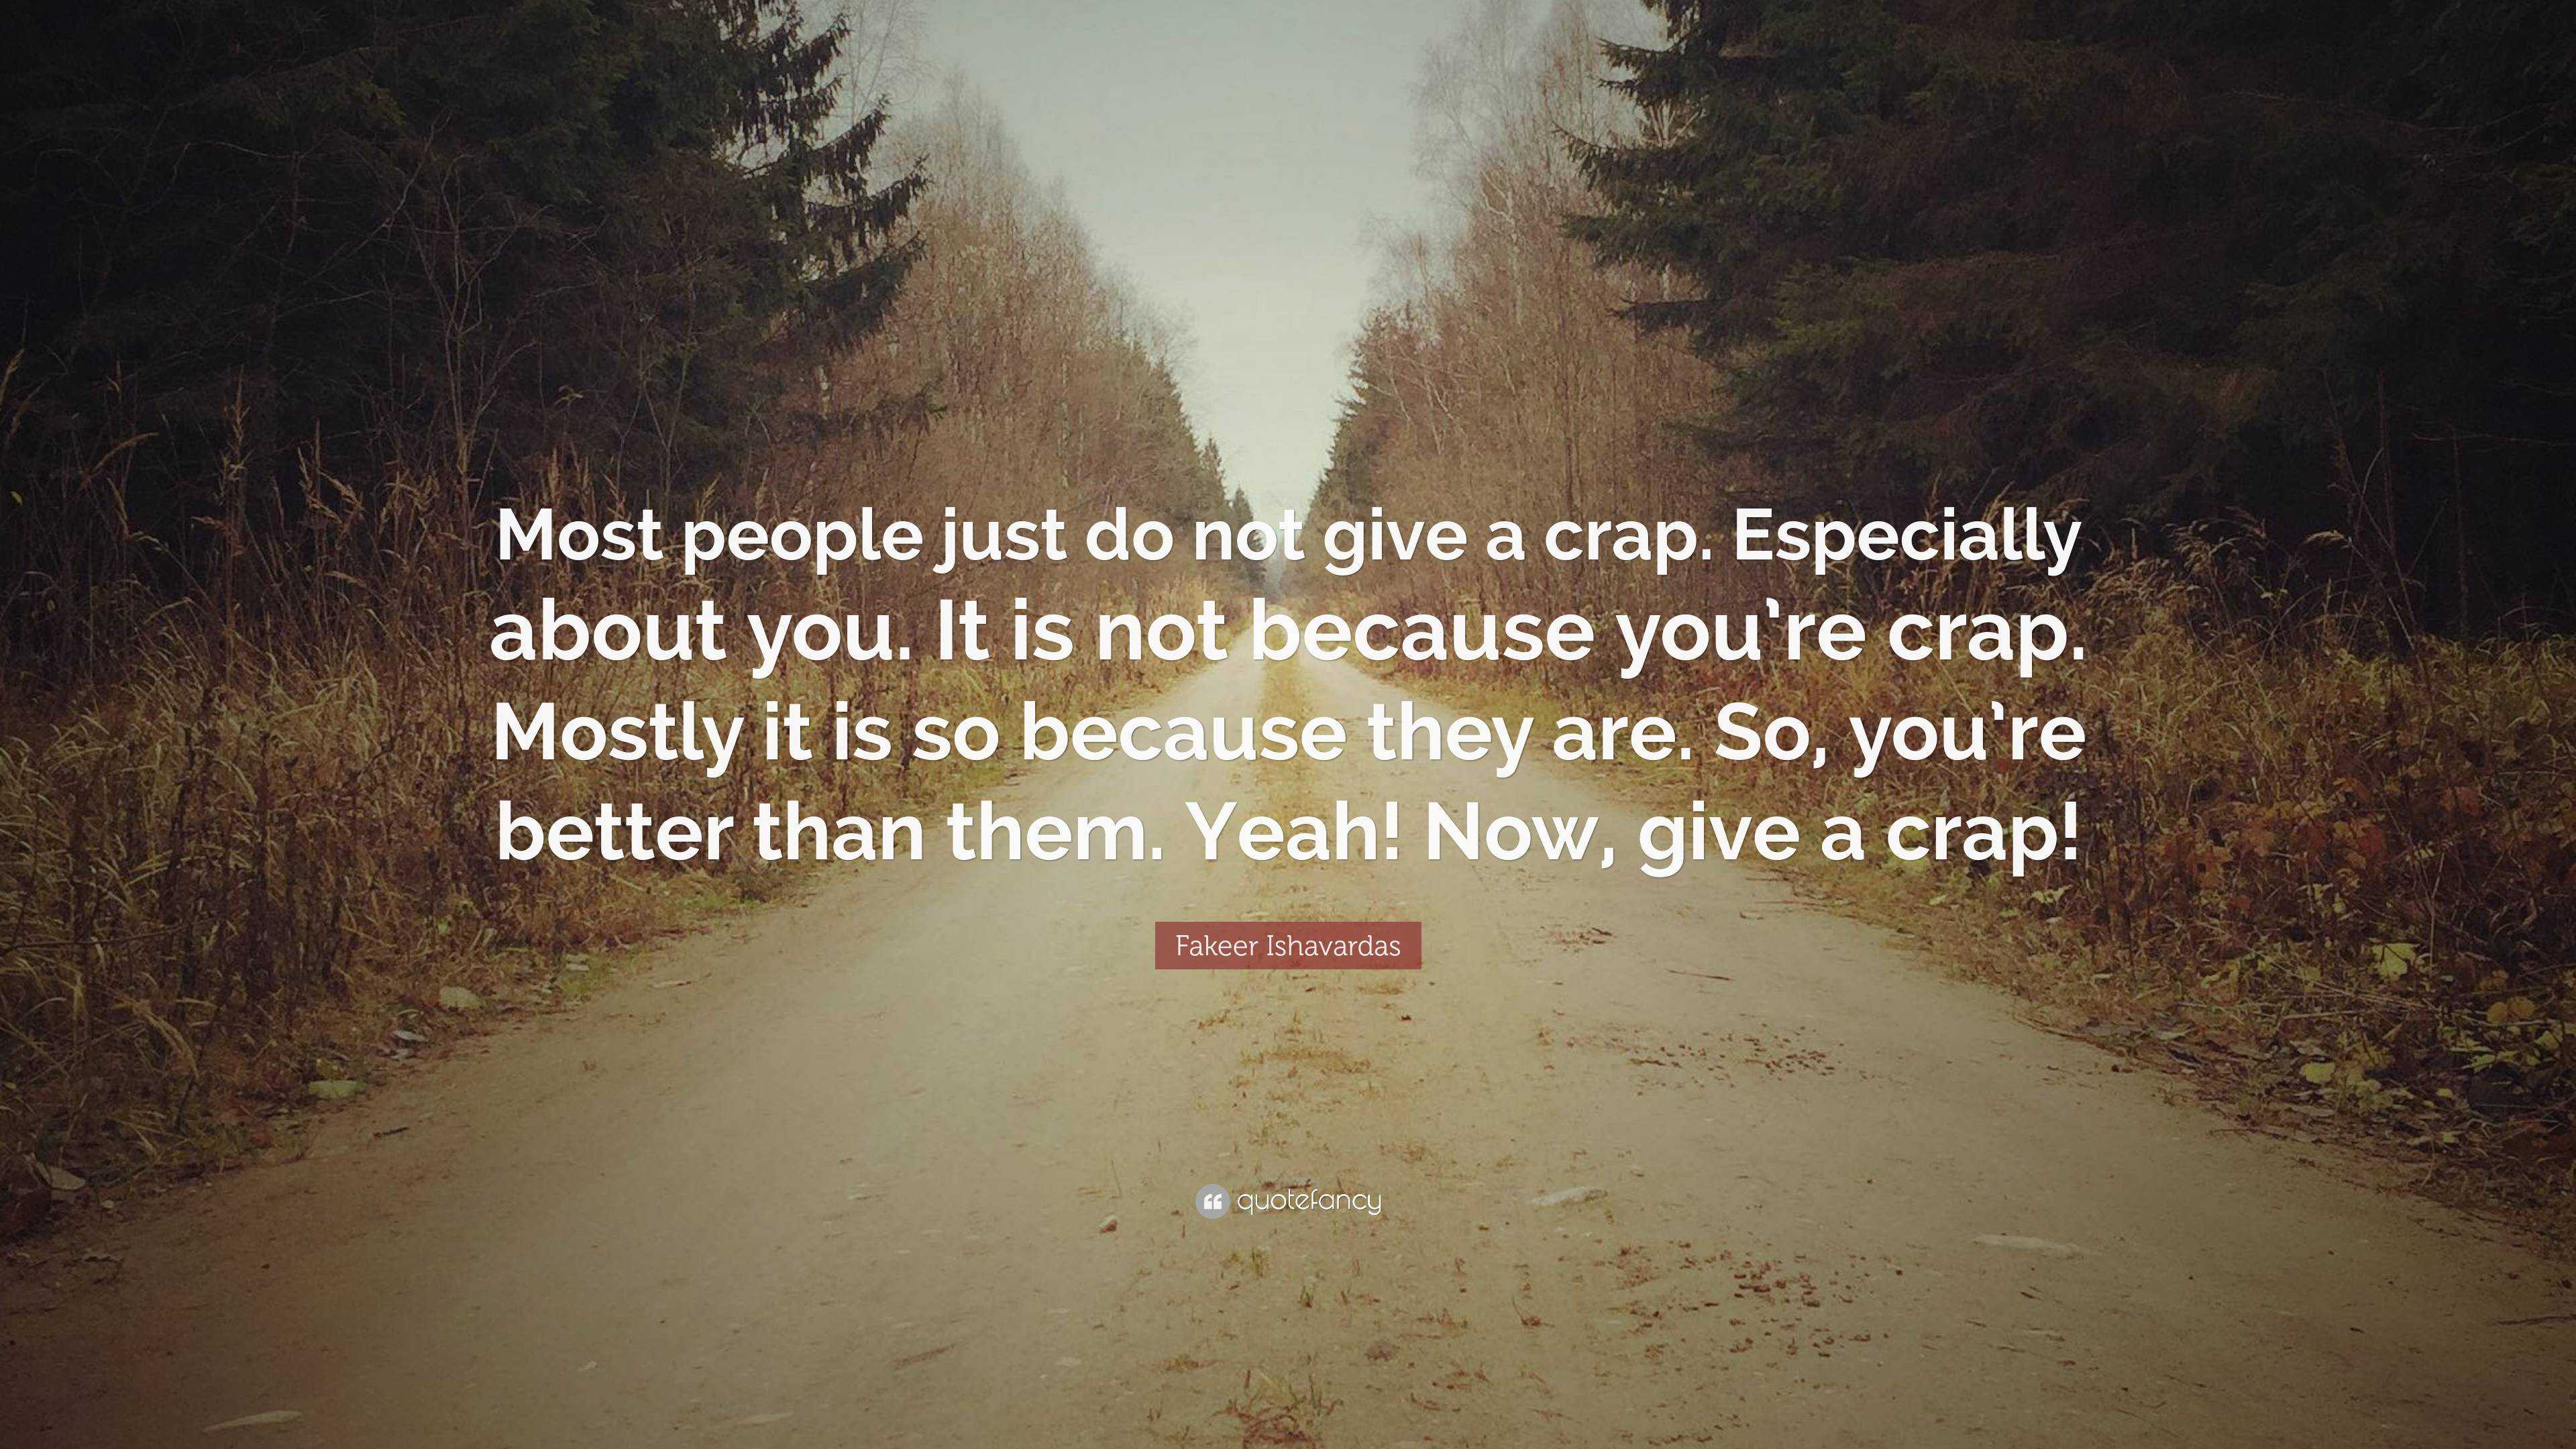 Fakeer Ishavardas Quote: “Most people just do not give a crap ...